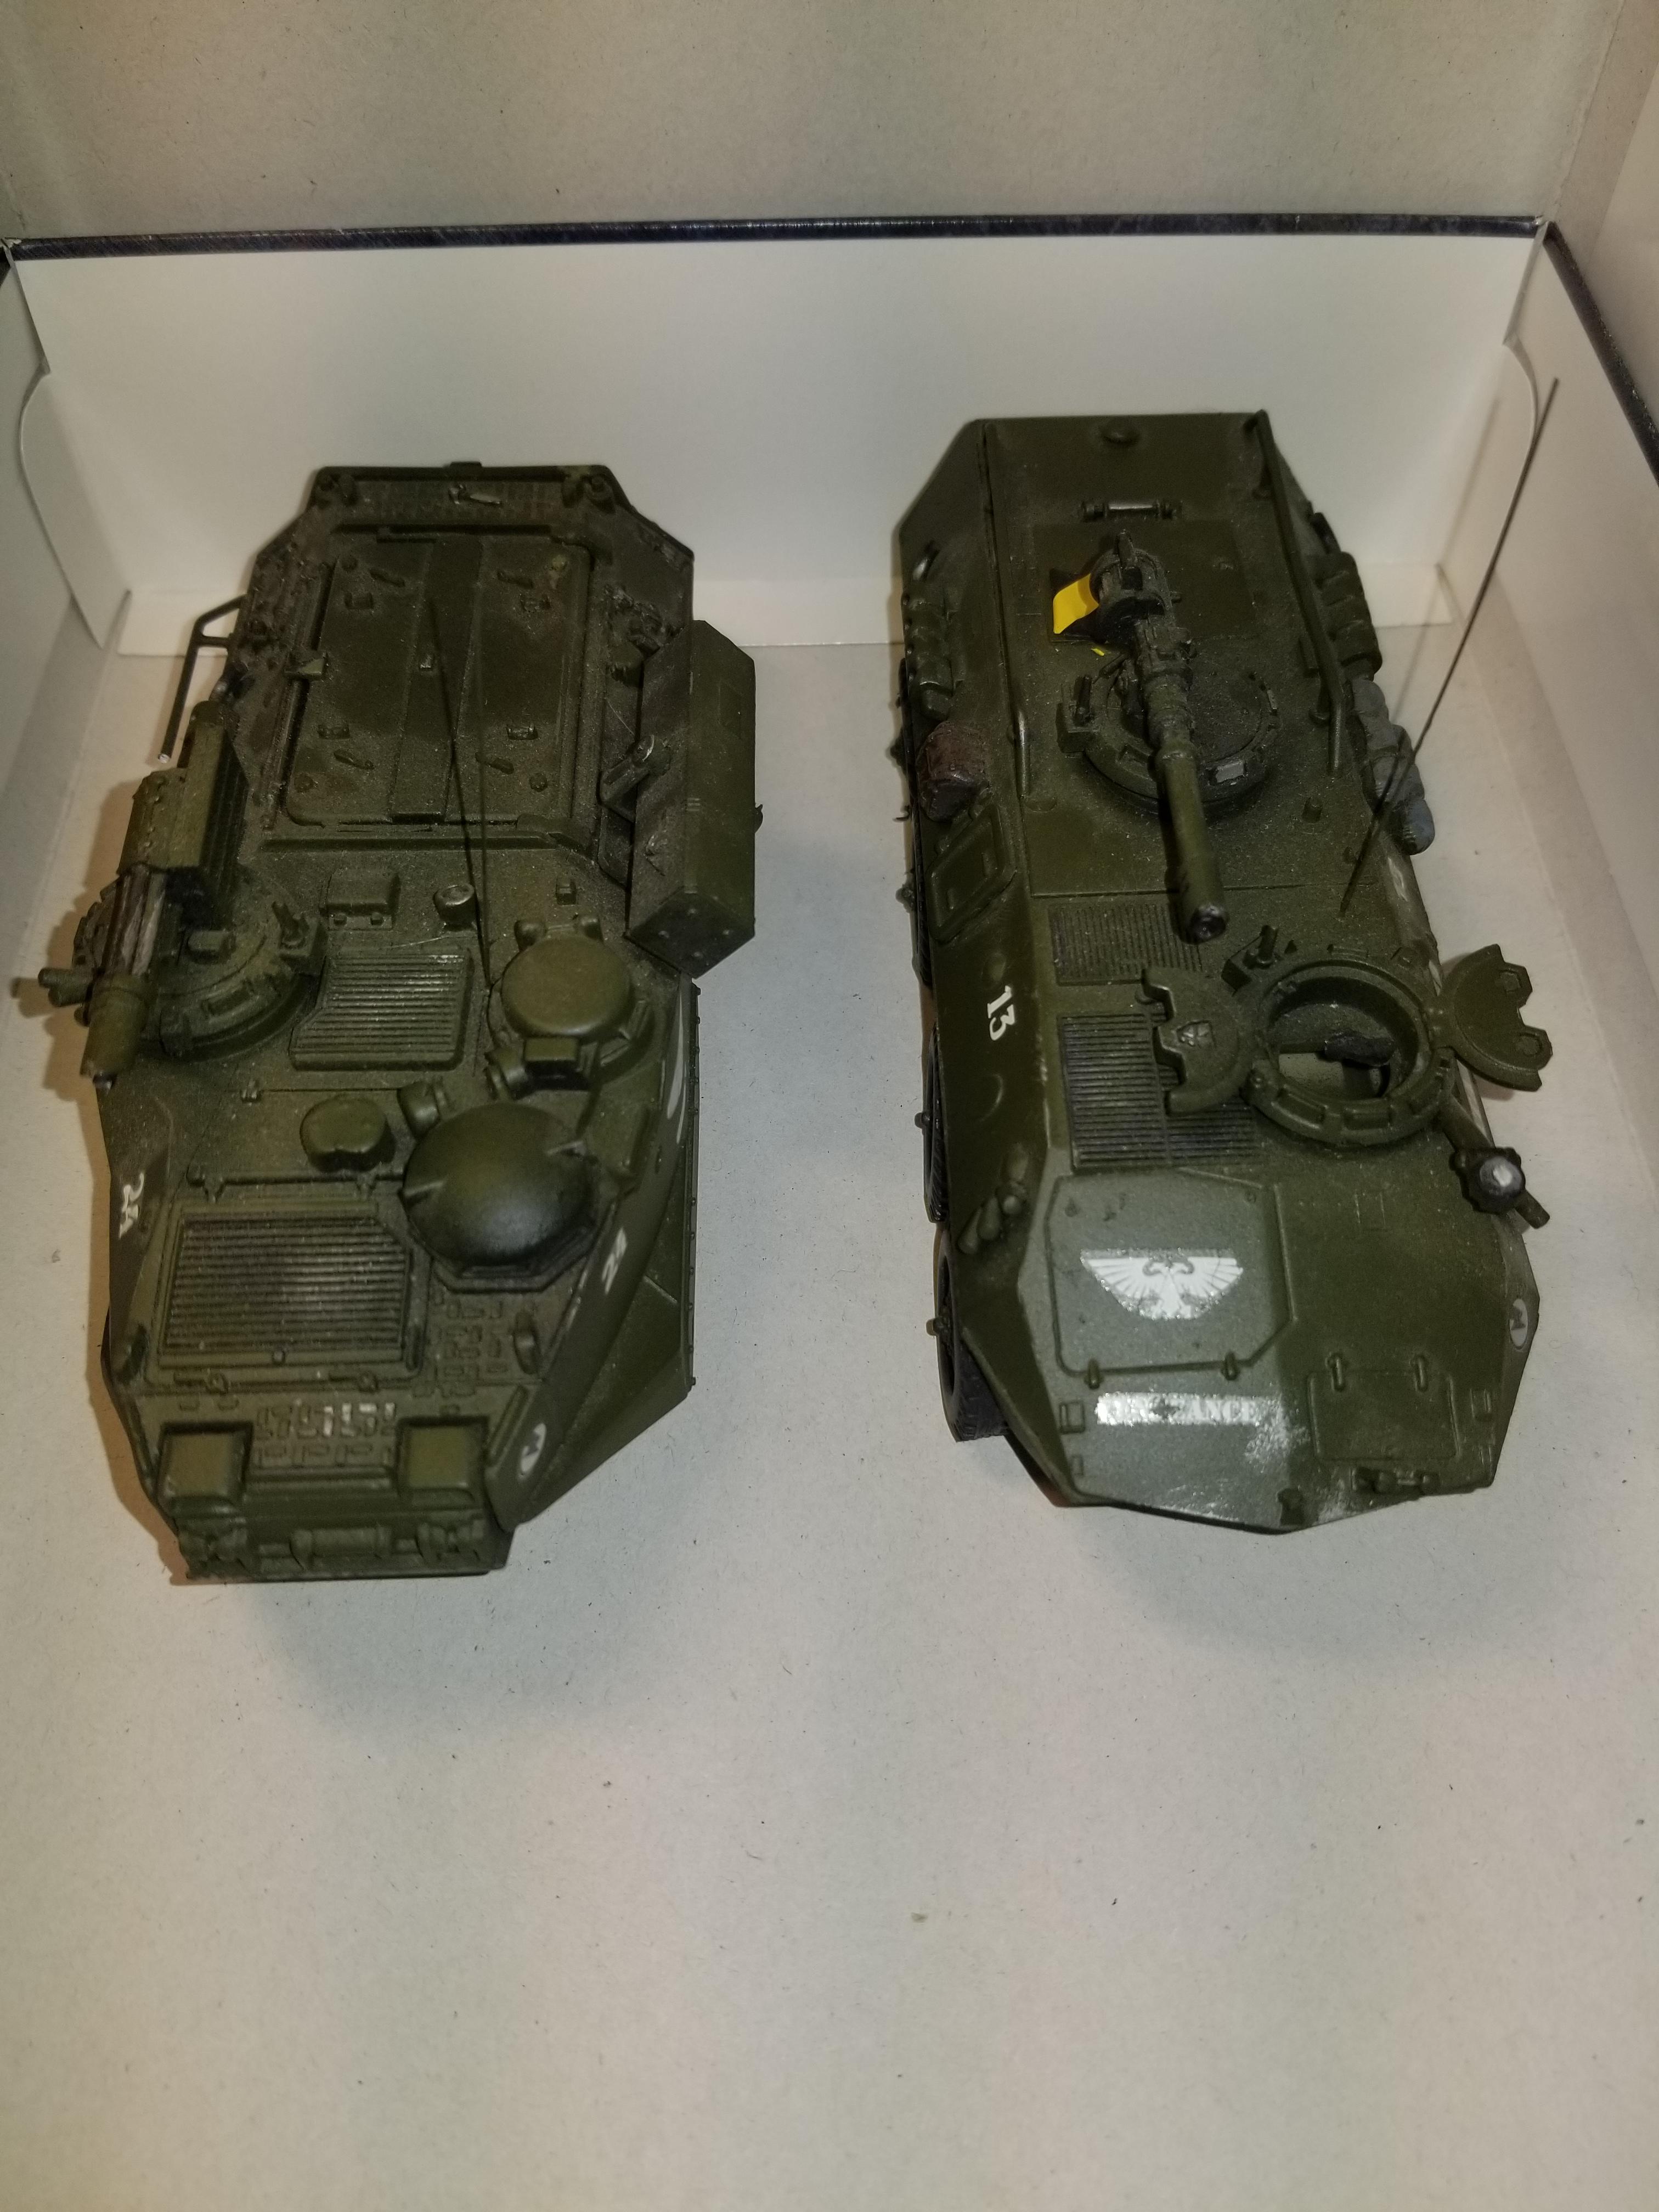 WH40k, Old vehicle conversions, plastic, top